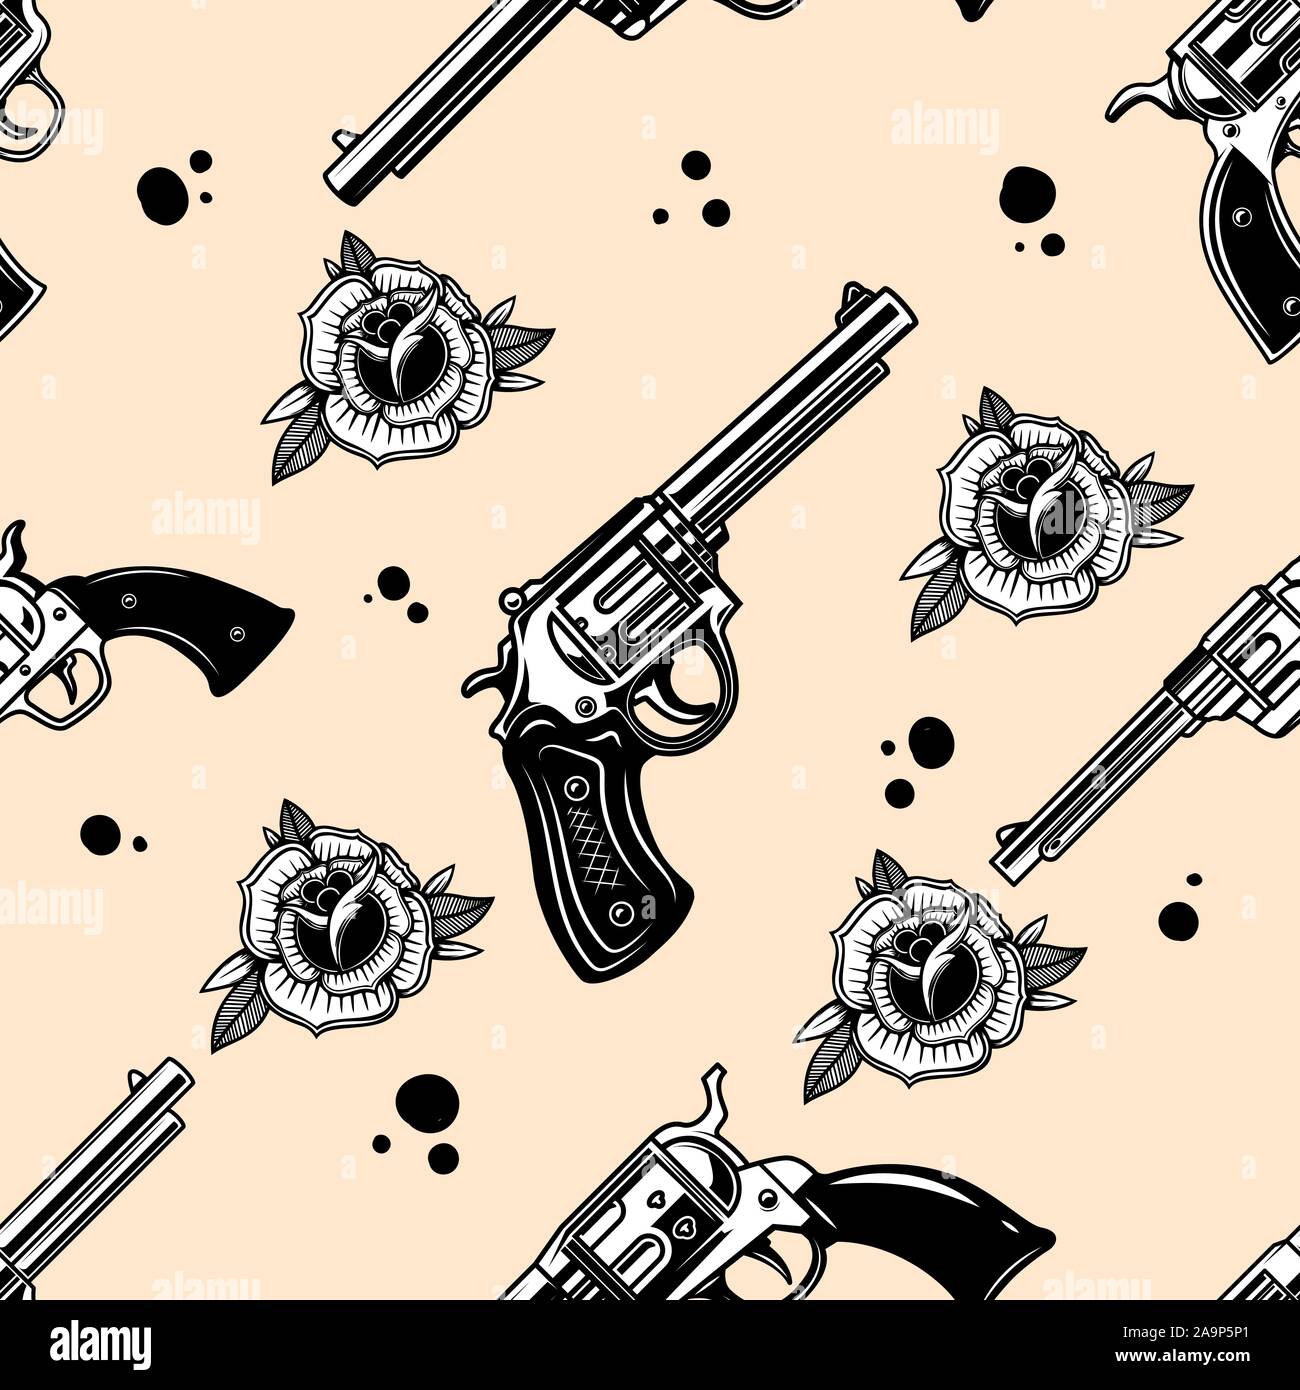 Seamless pattern with revolvers and roses. Design element for poster, card, banner, t shirt. Vector illustration Stock Vector